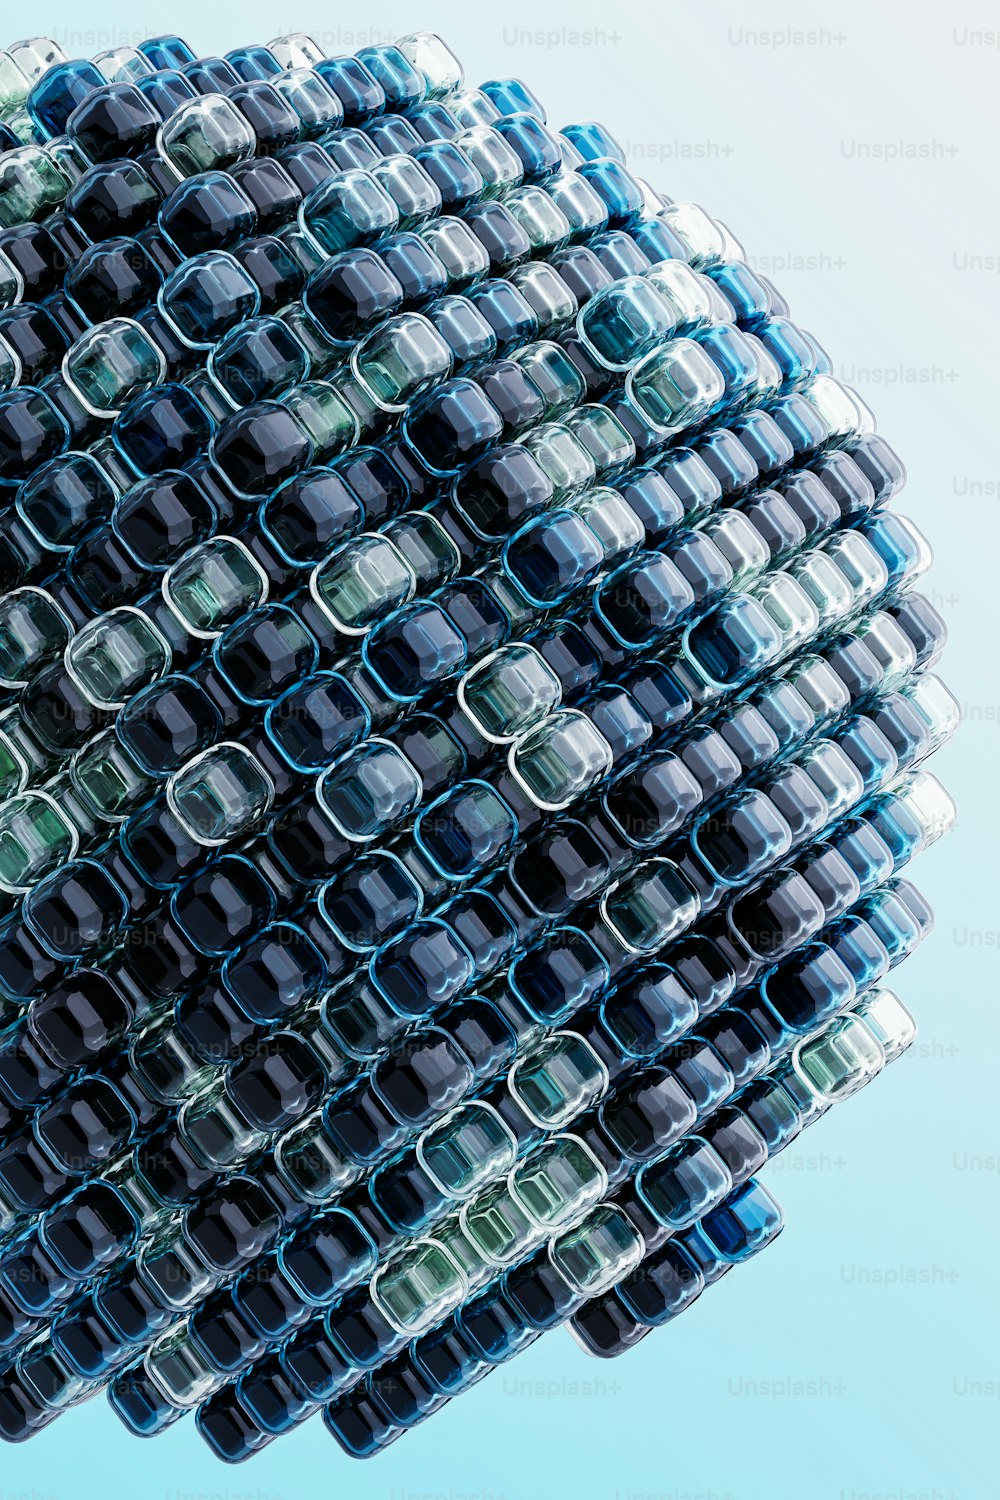 a bunch of glasses stacked on top of each other